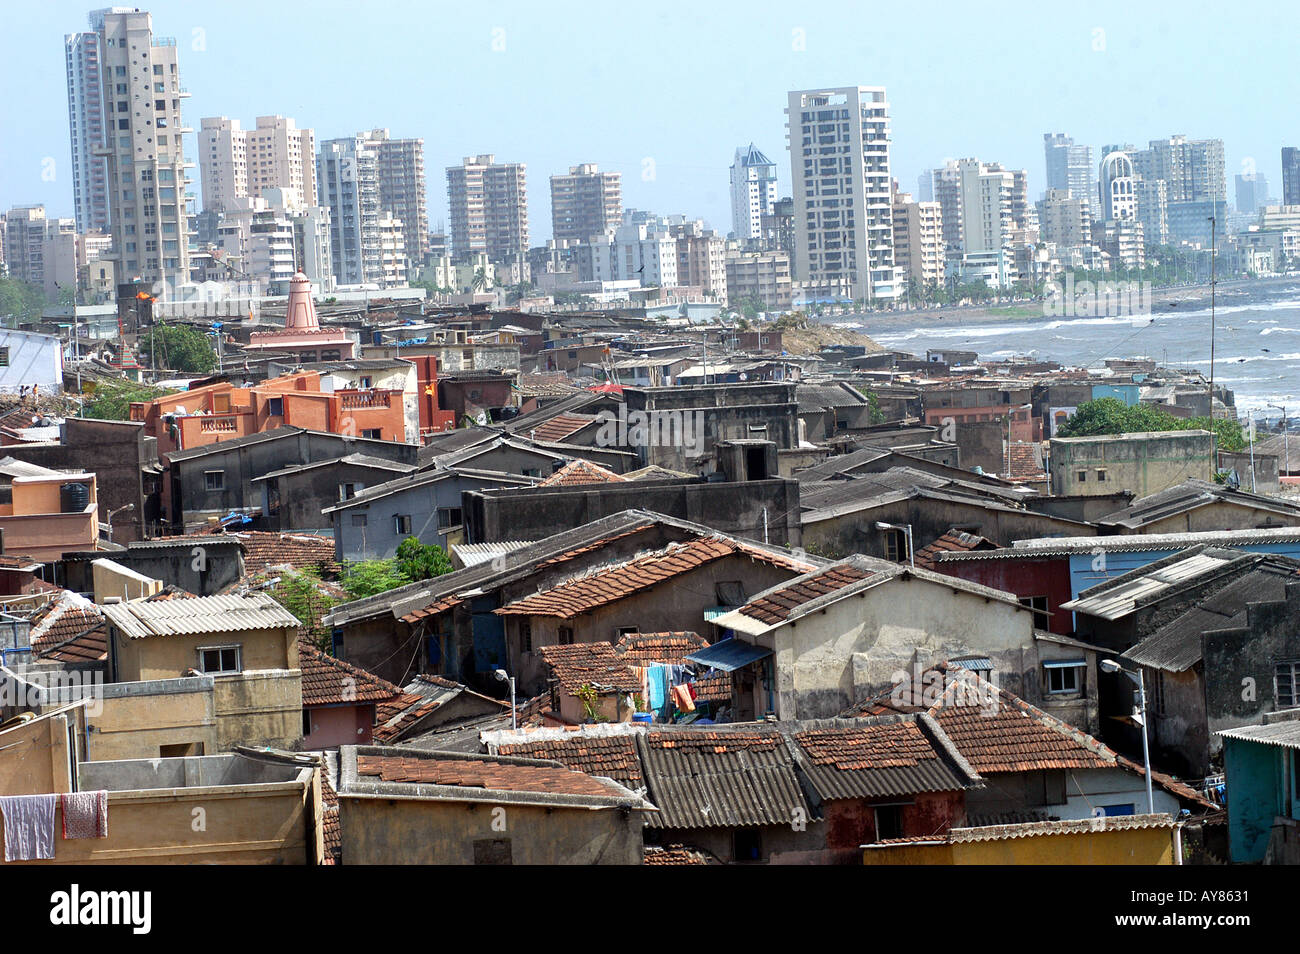 Indian cityscape, rich poor contrast, housing, wealthy skyscrapers skyline and bottom Worli village slums, Bombay, Mumbai, India dpa 251 asb Stock Photo